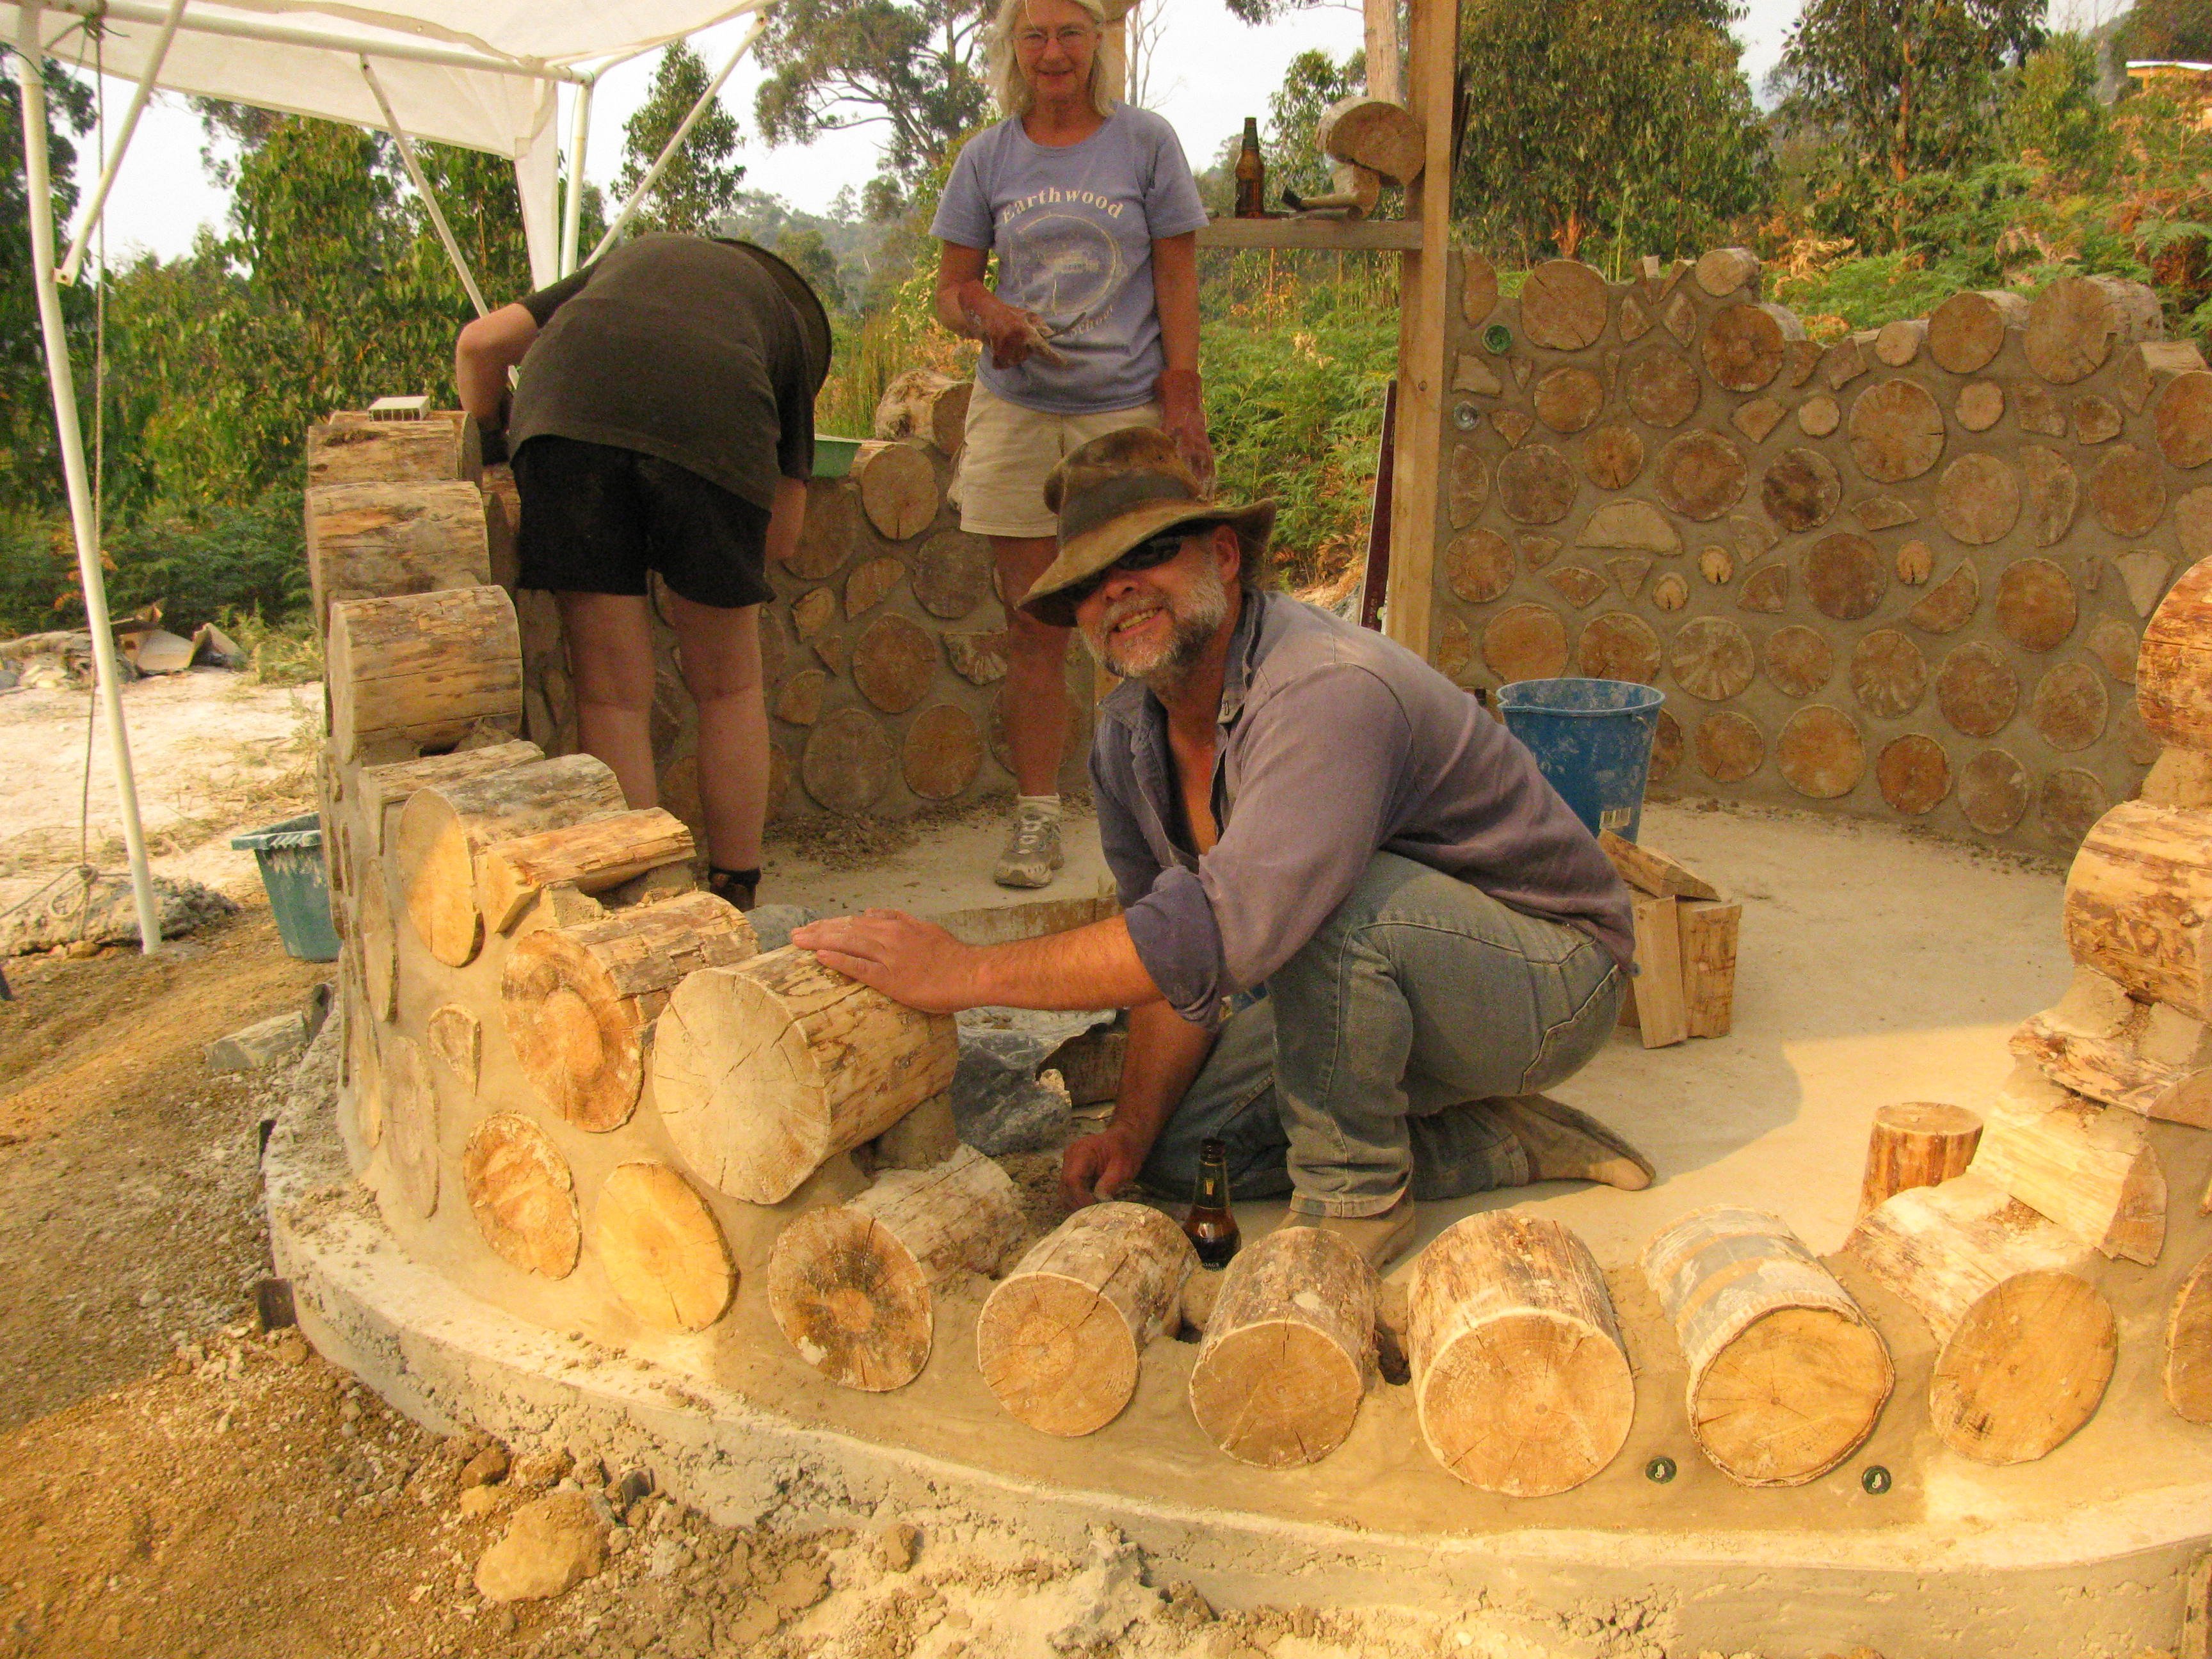 At a cordwood masonry construction workshop in Tasmania, Australia, Jaki looks on as a student sets a log-end for a cordwood sauna.